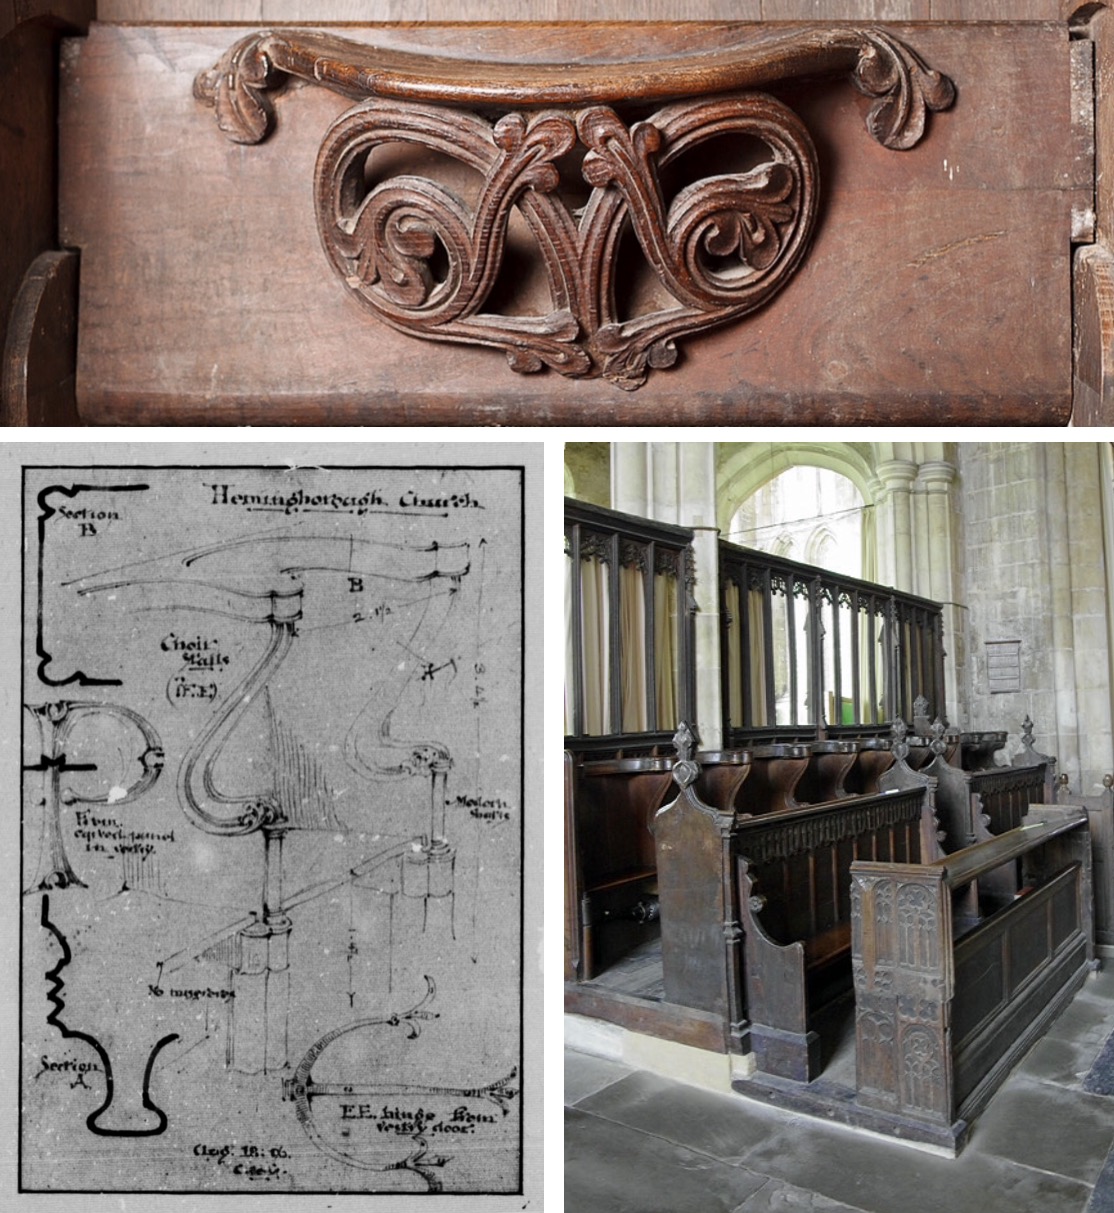 Top: Last and oldest misericord, dated 1200. Bottom left: measured drawing of choir stall. Bottom right: last remaining choir stalls (back row). St. Marybthe Virgin Church, Hemingbrough, England.